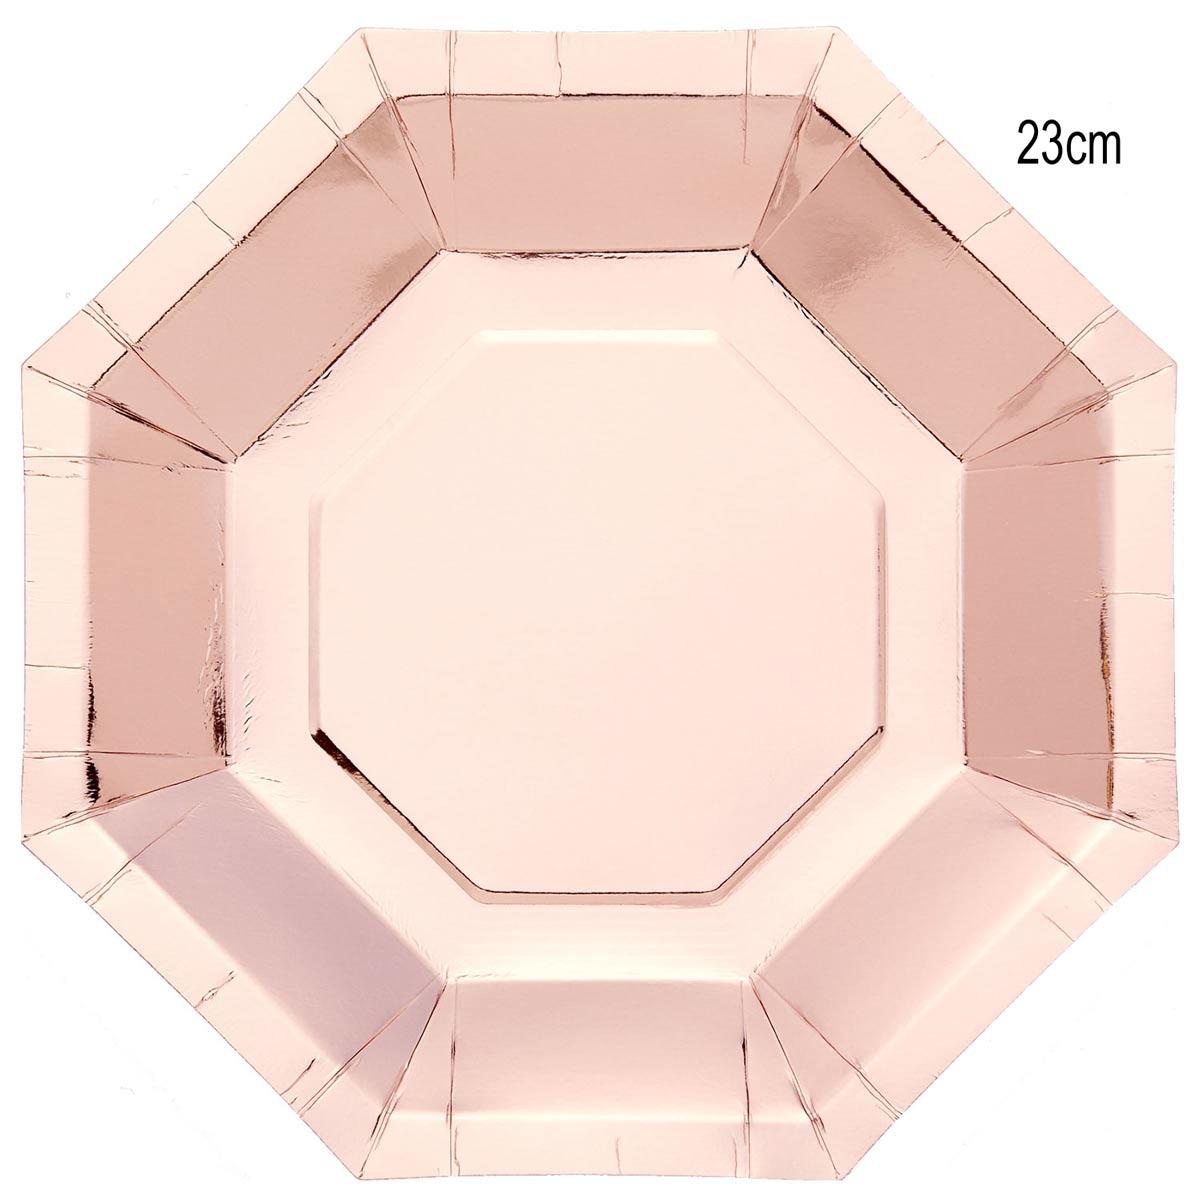 Pack 8 Metallic Rose Gold Octagonal 23cm Paper Dinner Plates by Amscan 9908648 available here at Karnival Costumes online party shop